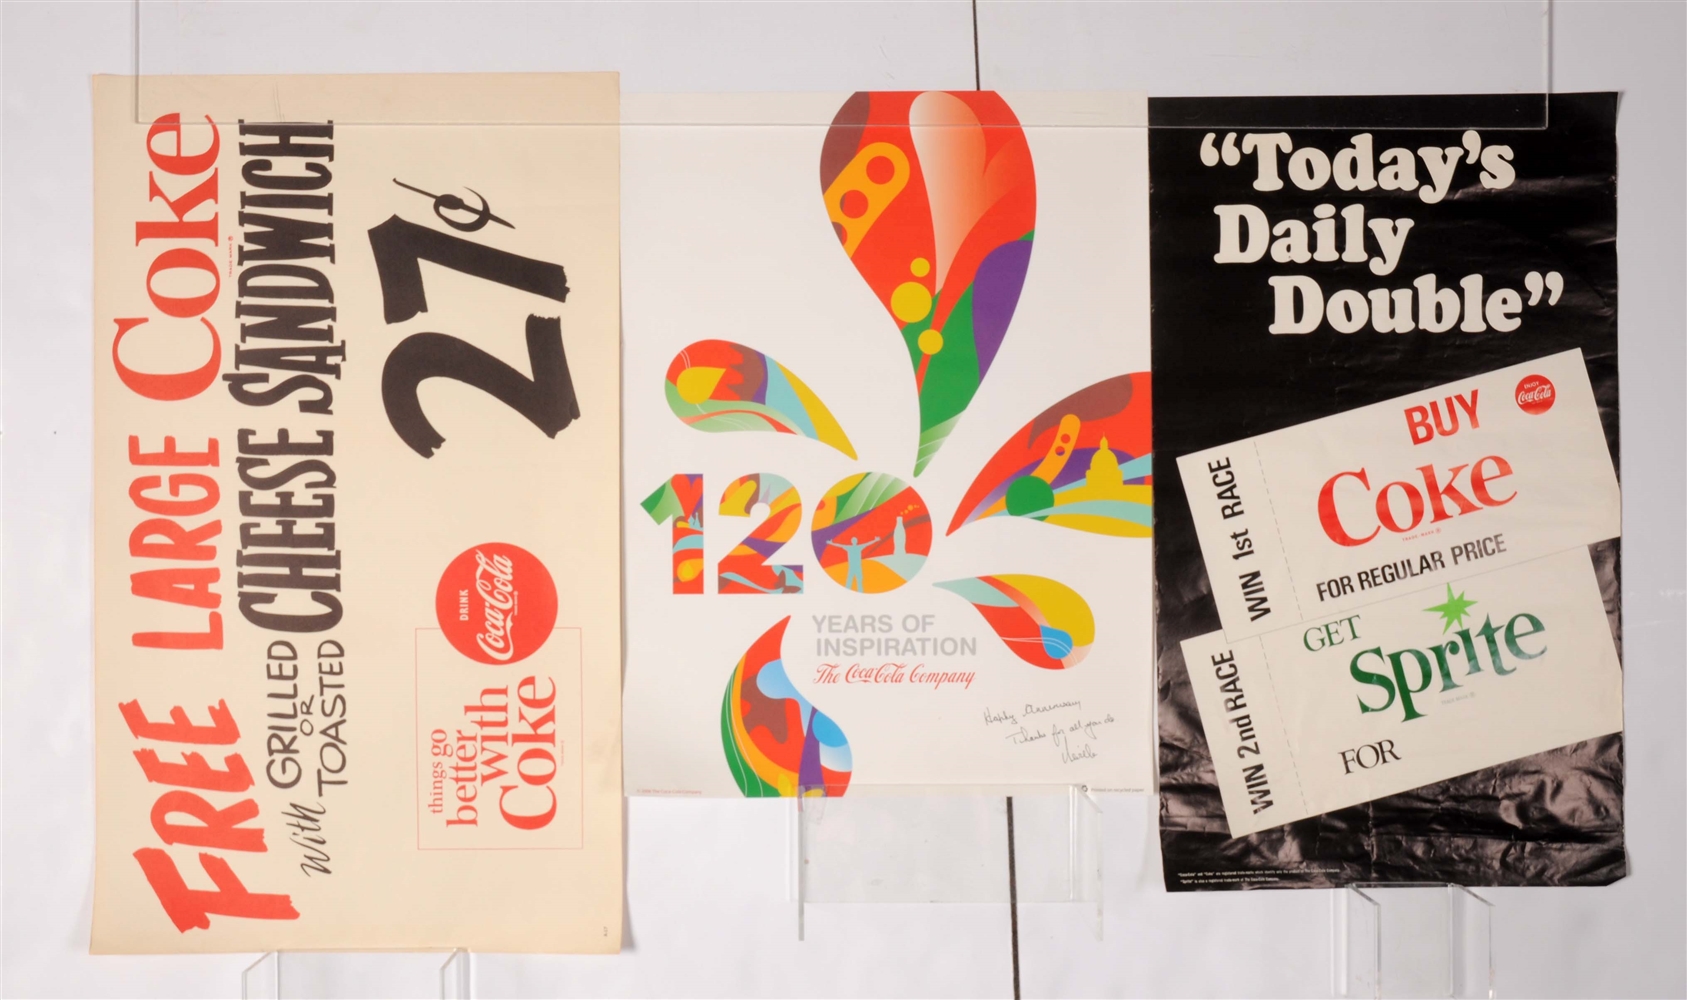 LOT OF 3: COCA-COLA ADVERTISING POSTERS.